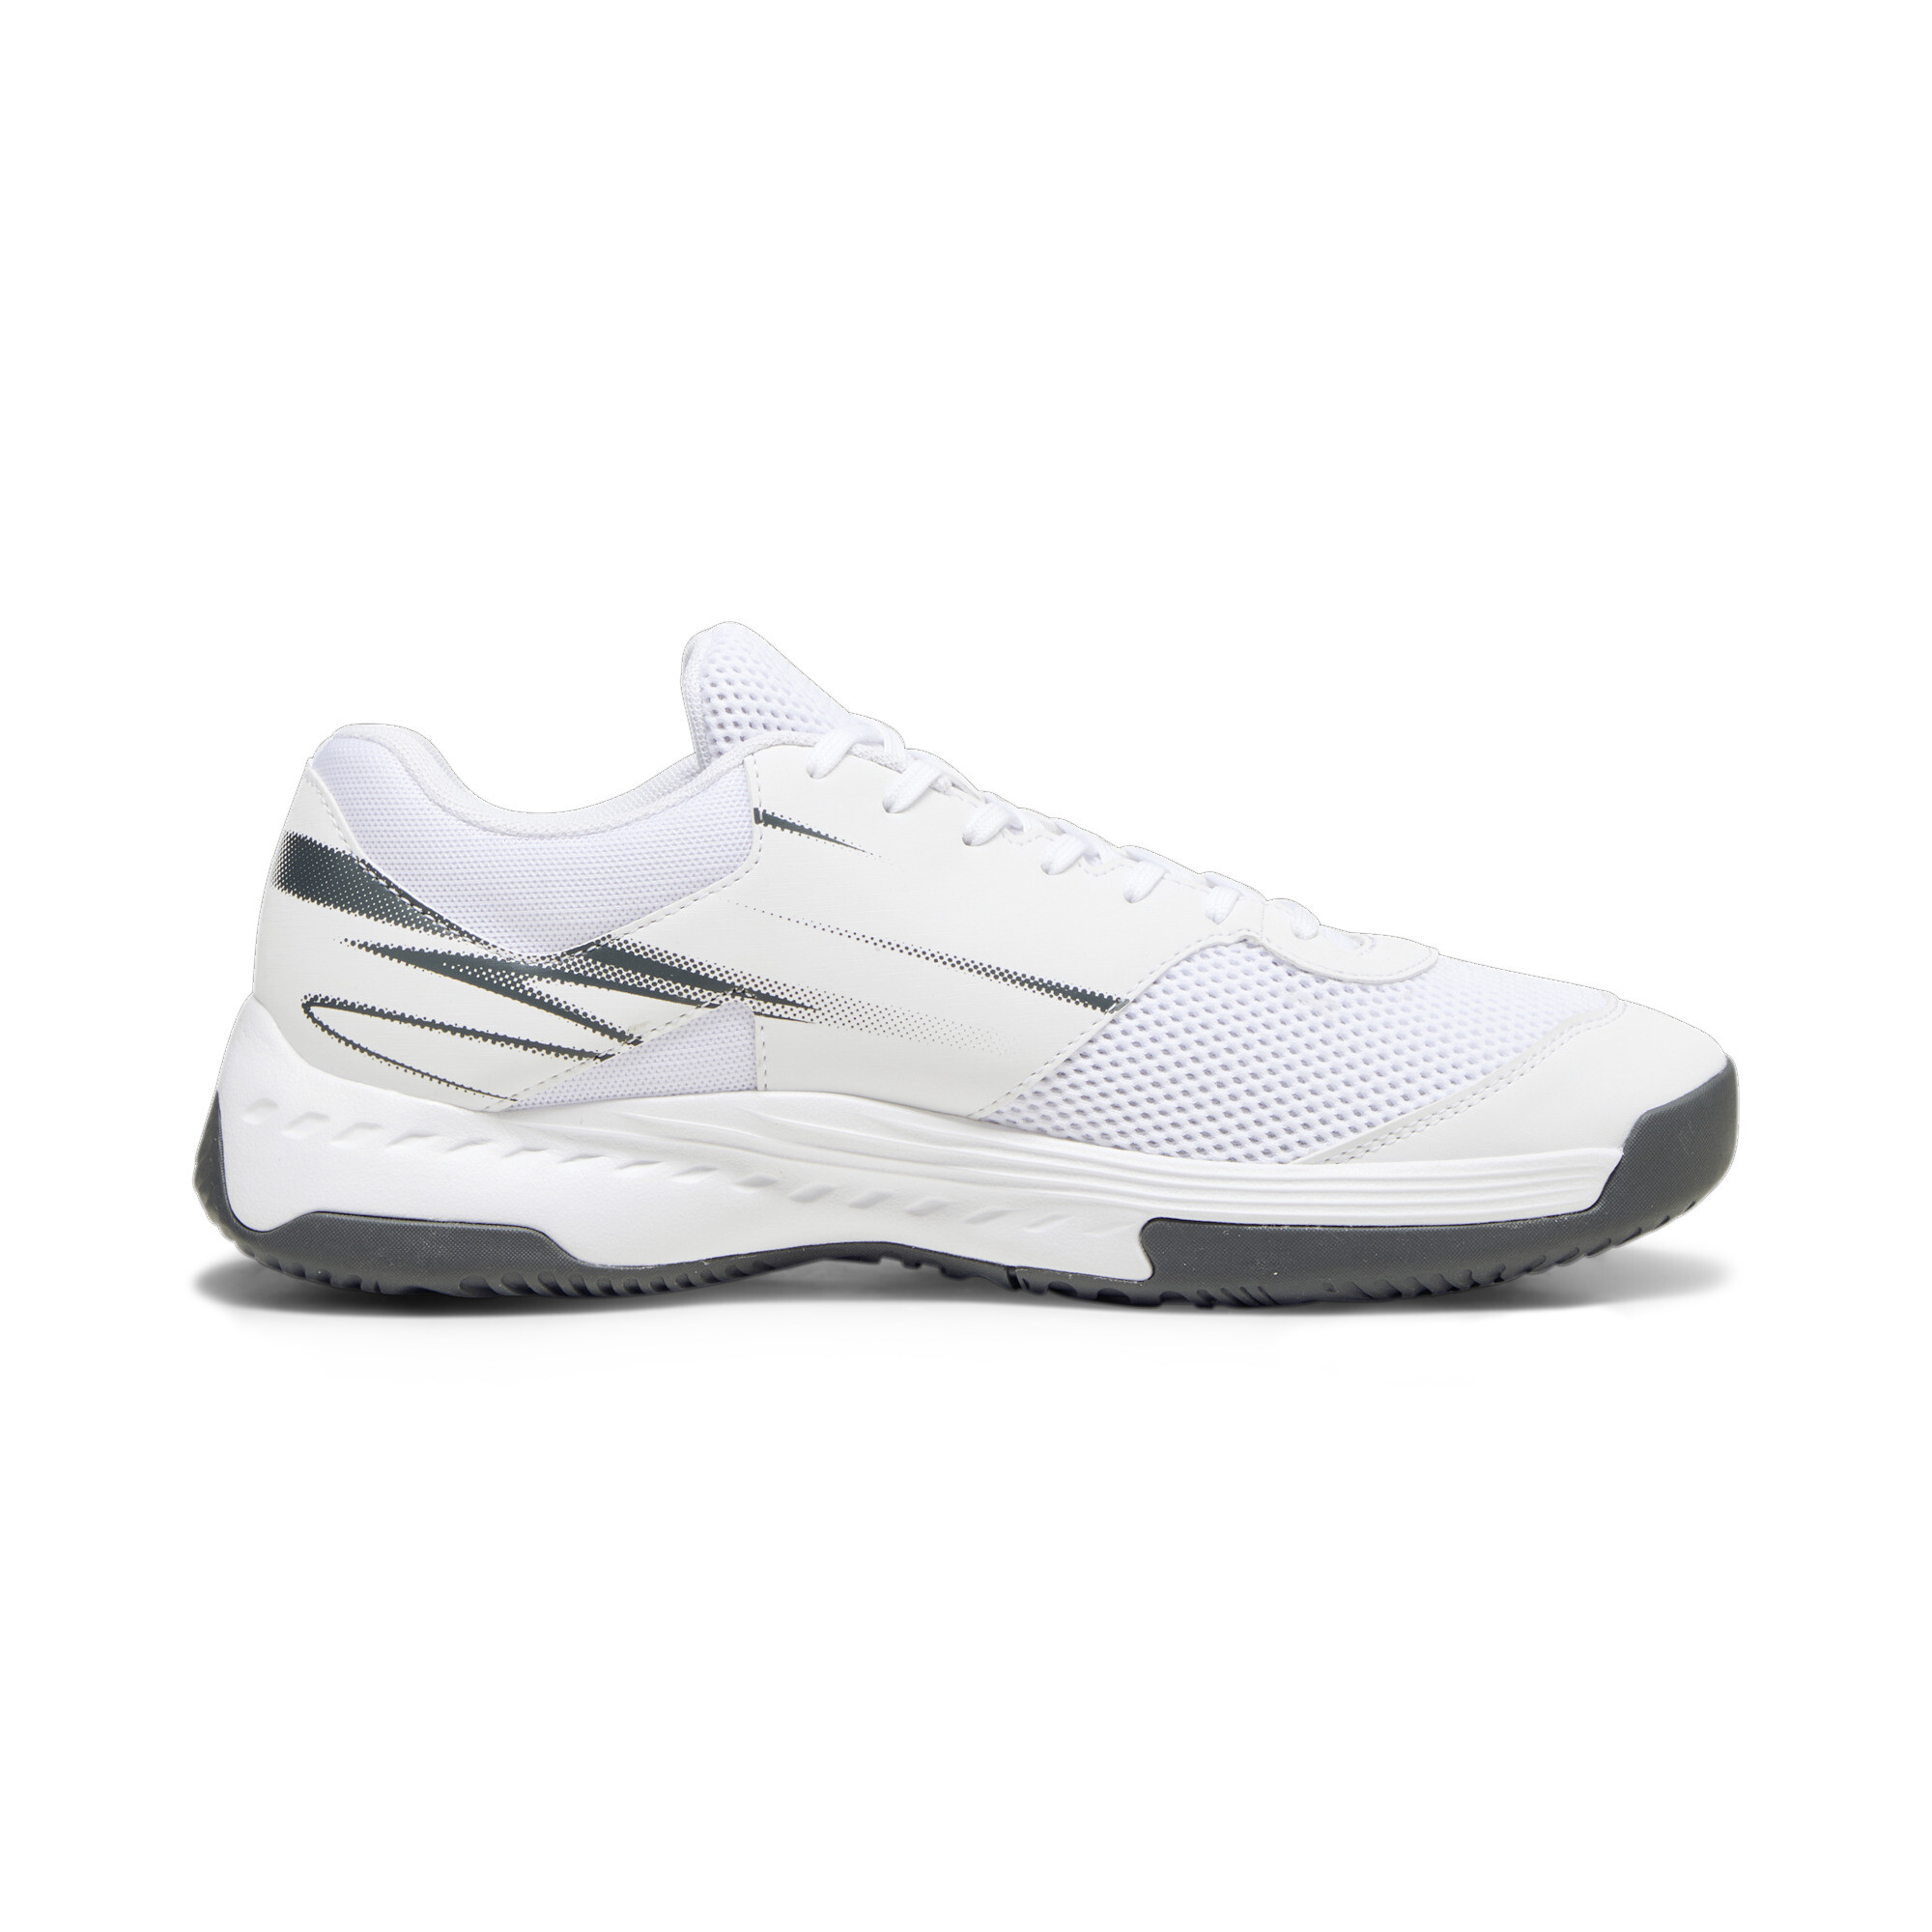 Puma Varion II Indoor Sports Shoes, White, Size 45, Shoes